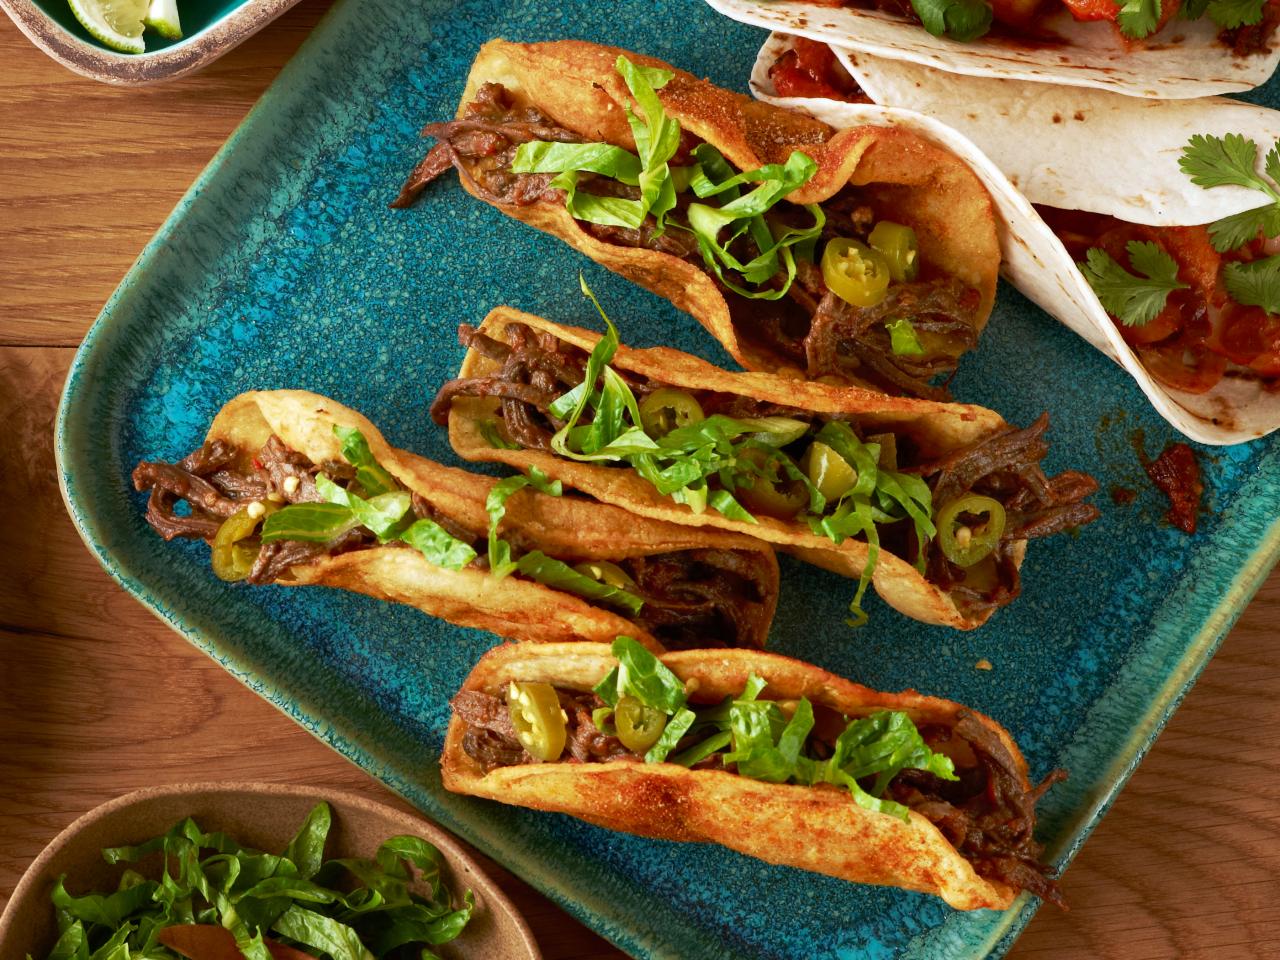 Settle These Food Debates and We’ll Guess Which Three Foods You Love the Most tacos